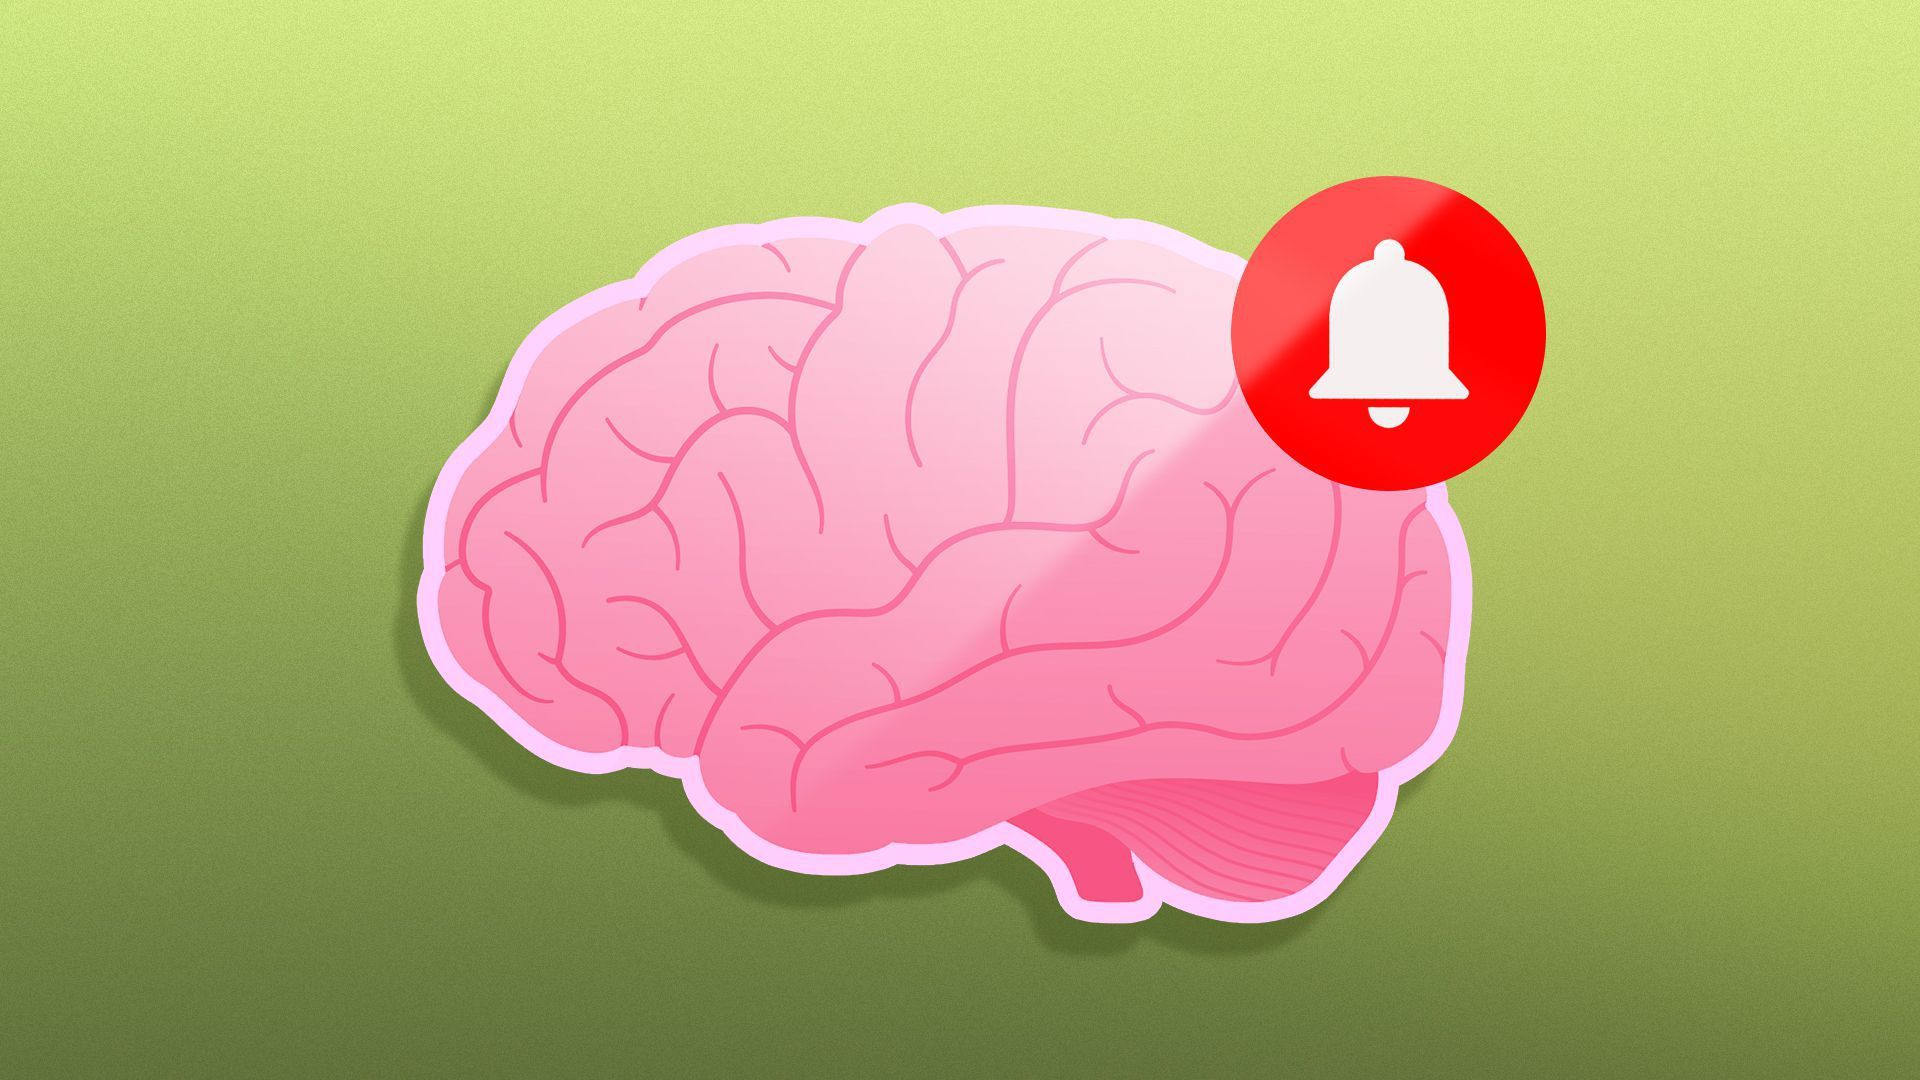 An illustration of a brain with an app notification next to it